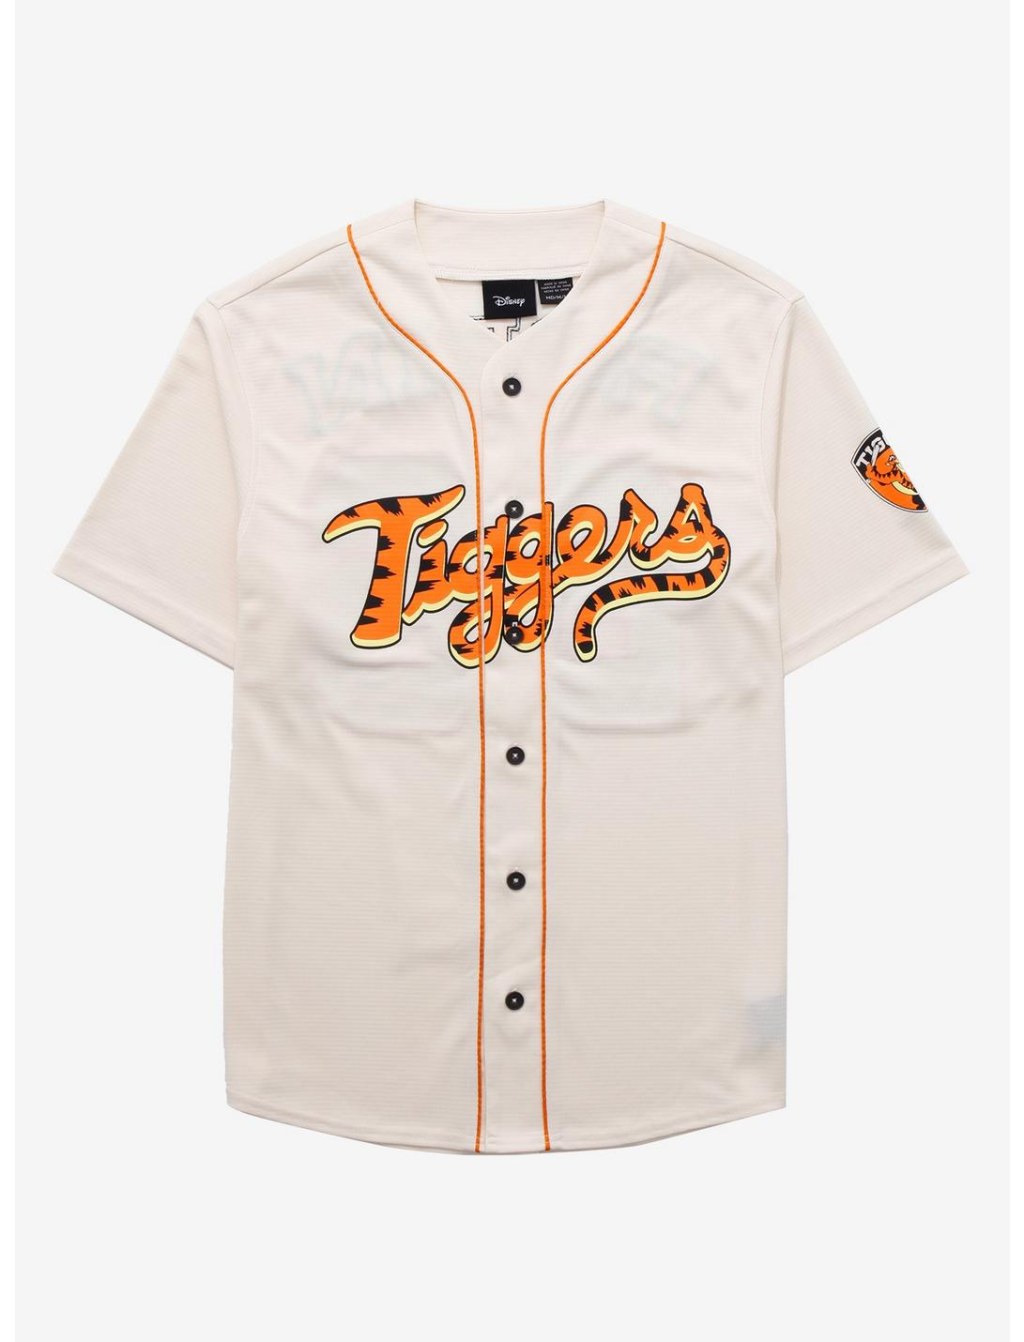 Picture of: Disney Winnie the Pooh Tiggers Baseball Jersey – BoxLunch